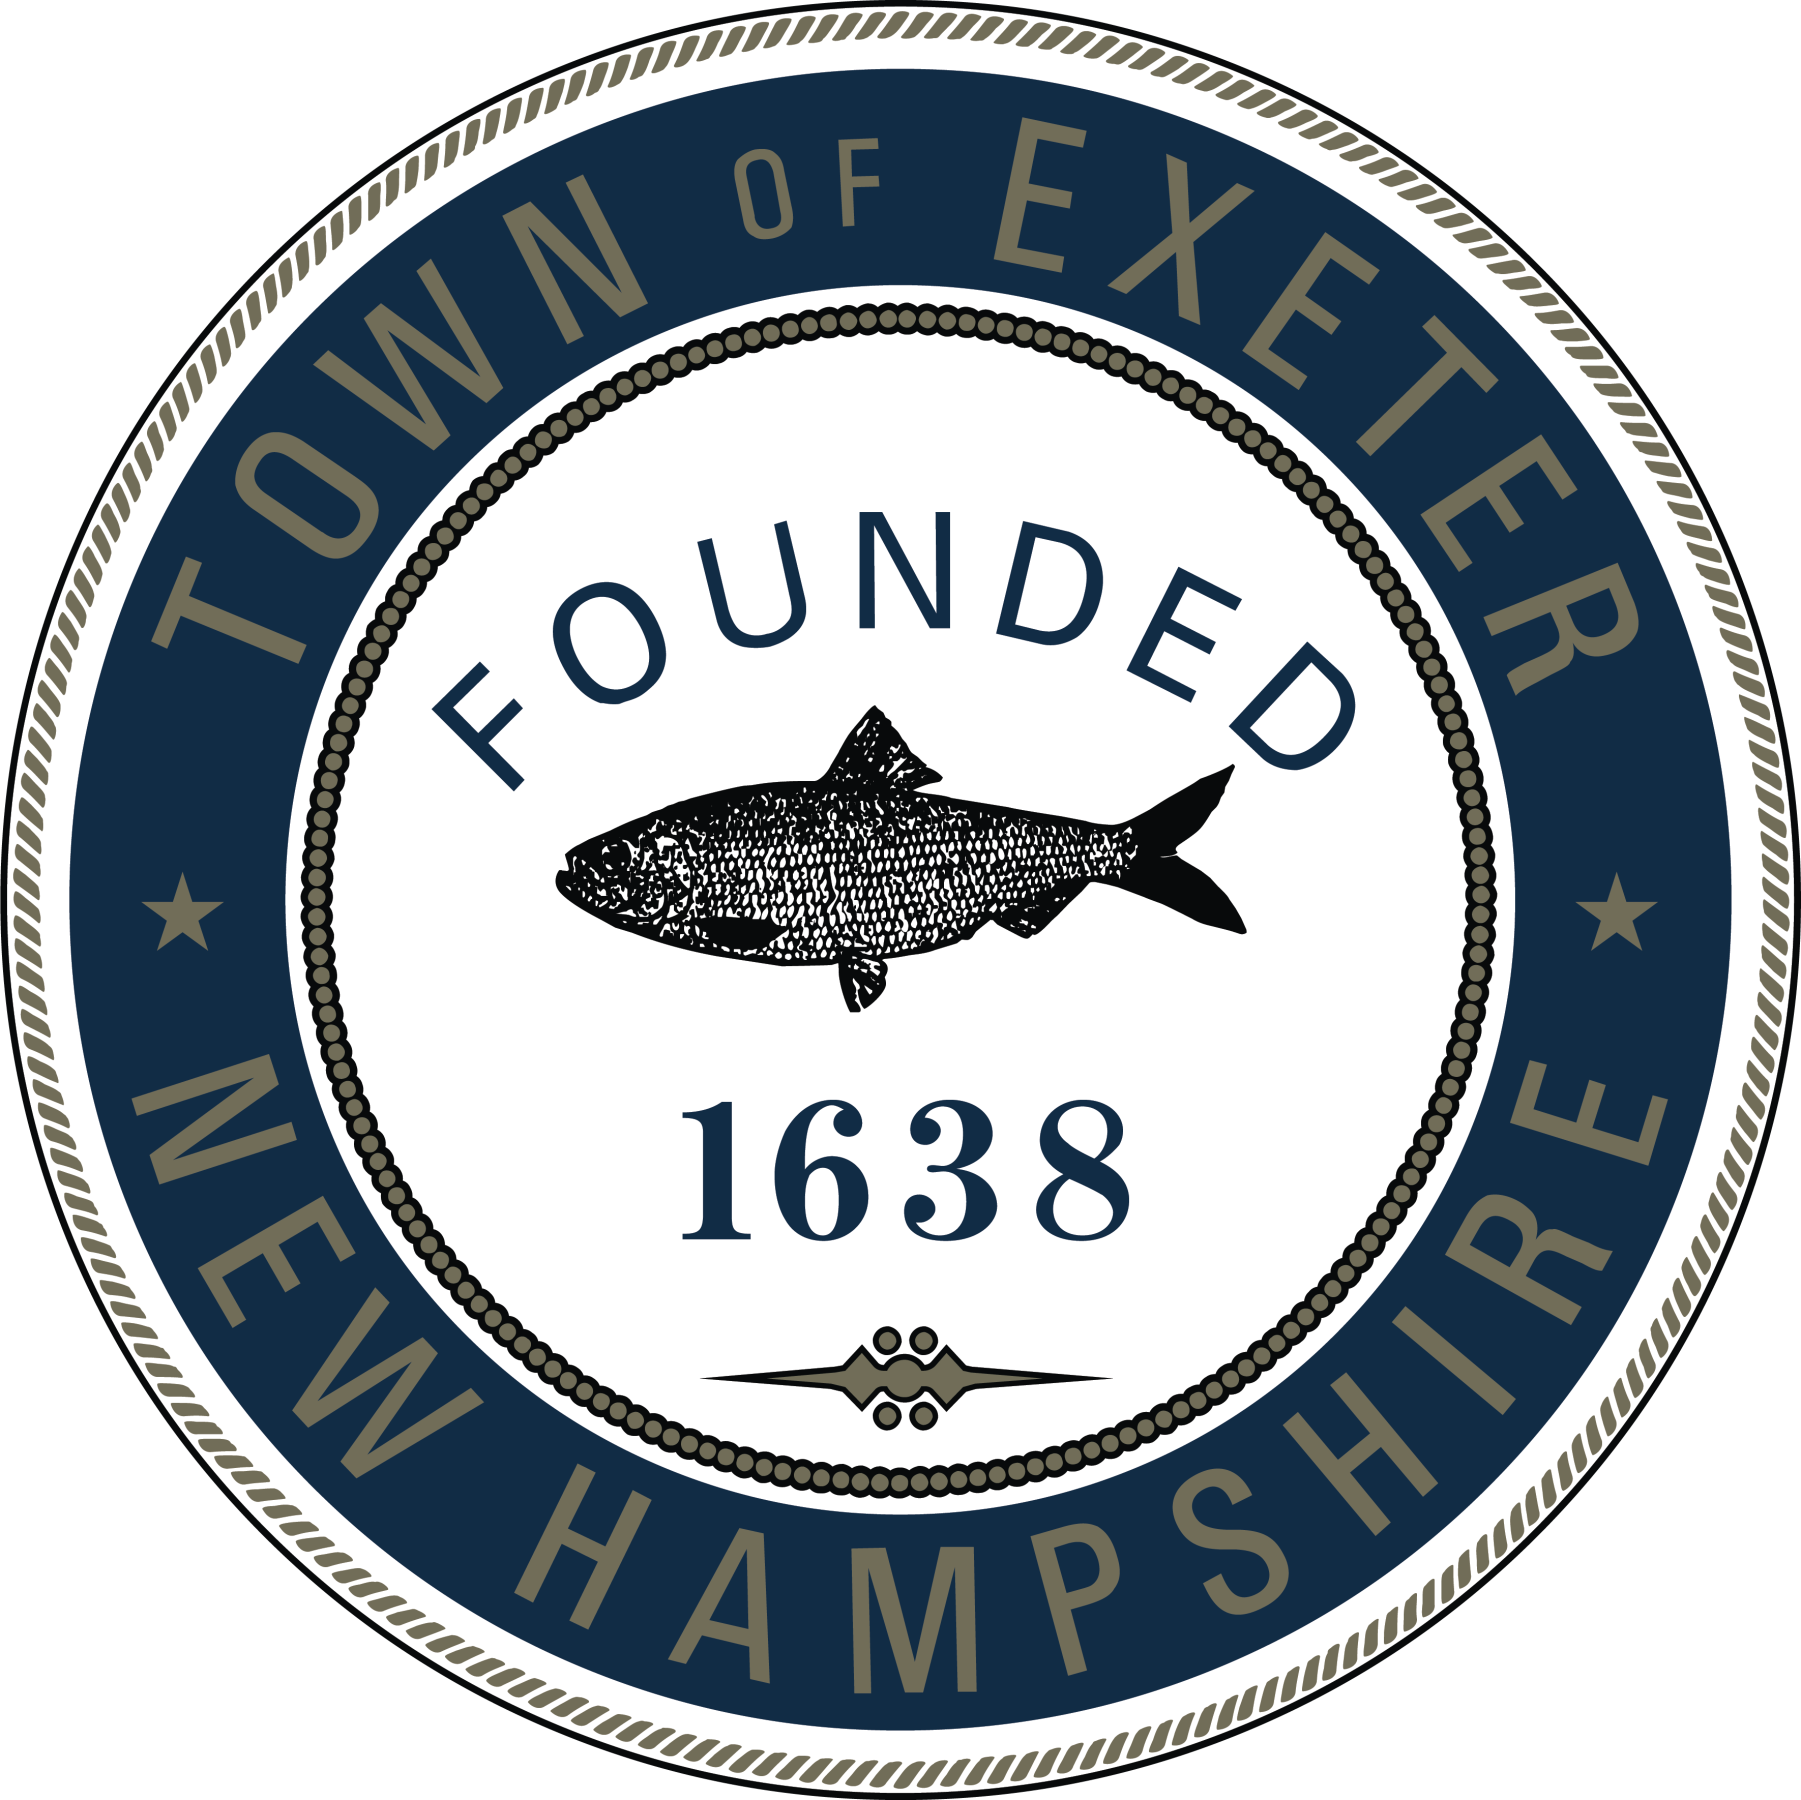 town of exeter logo